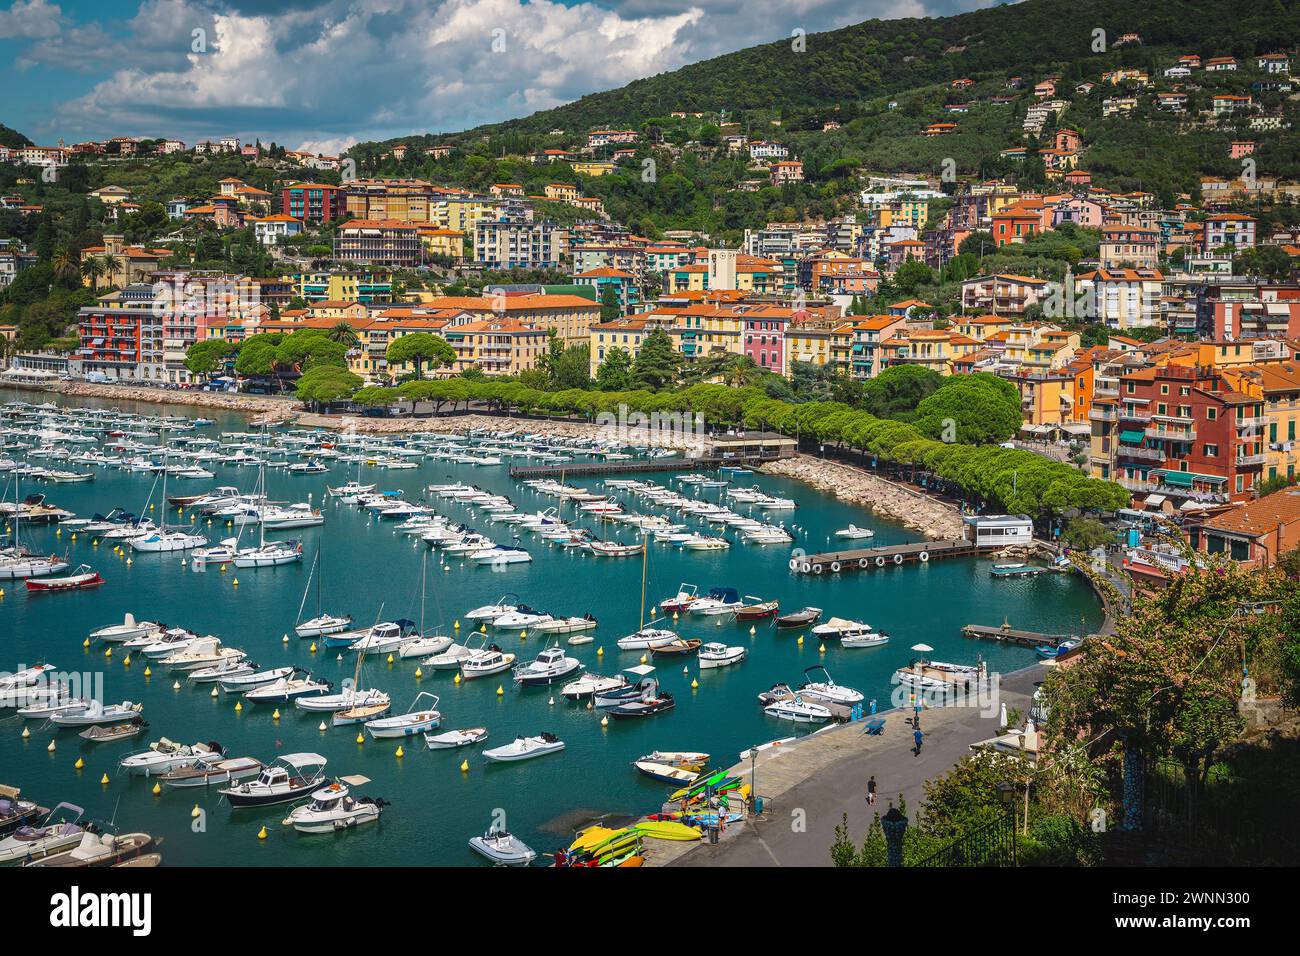 Stunning mediterranean beach resort view from the hill with harbor and seaside colorful buildings, Lerici, Liguria, Italy, Europe Stock Photo